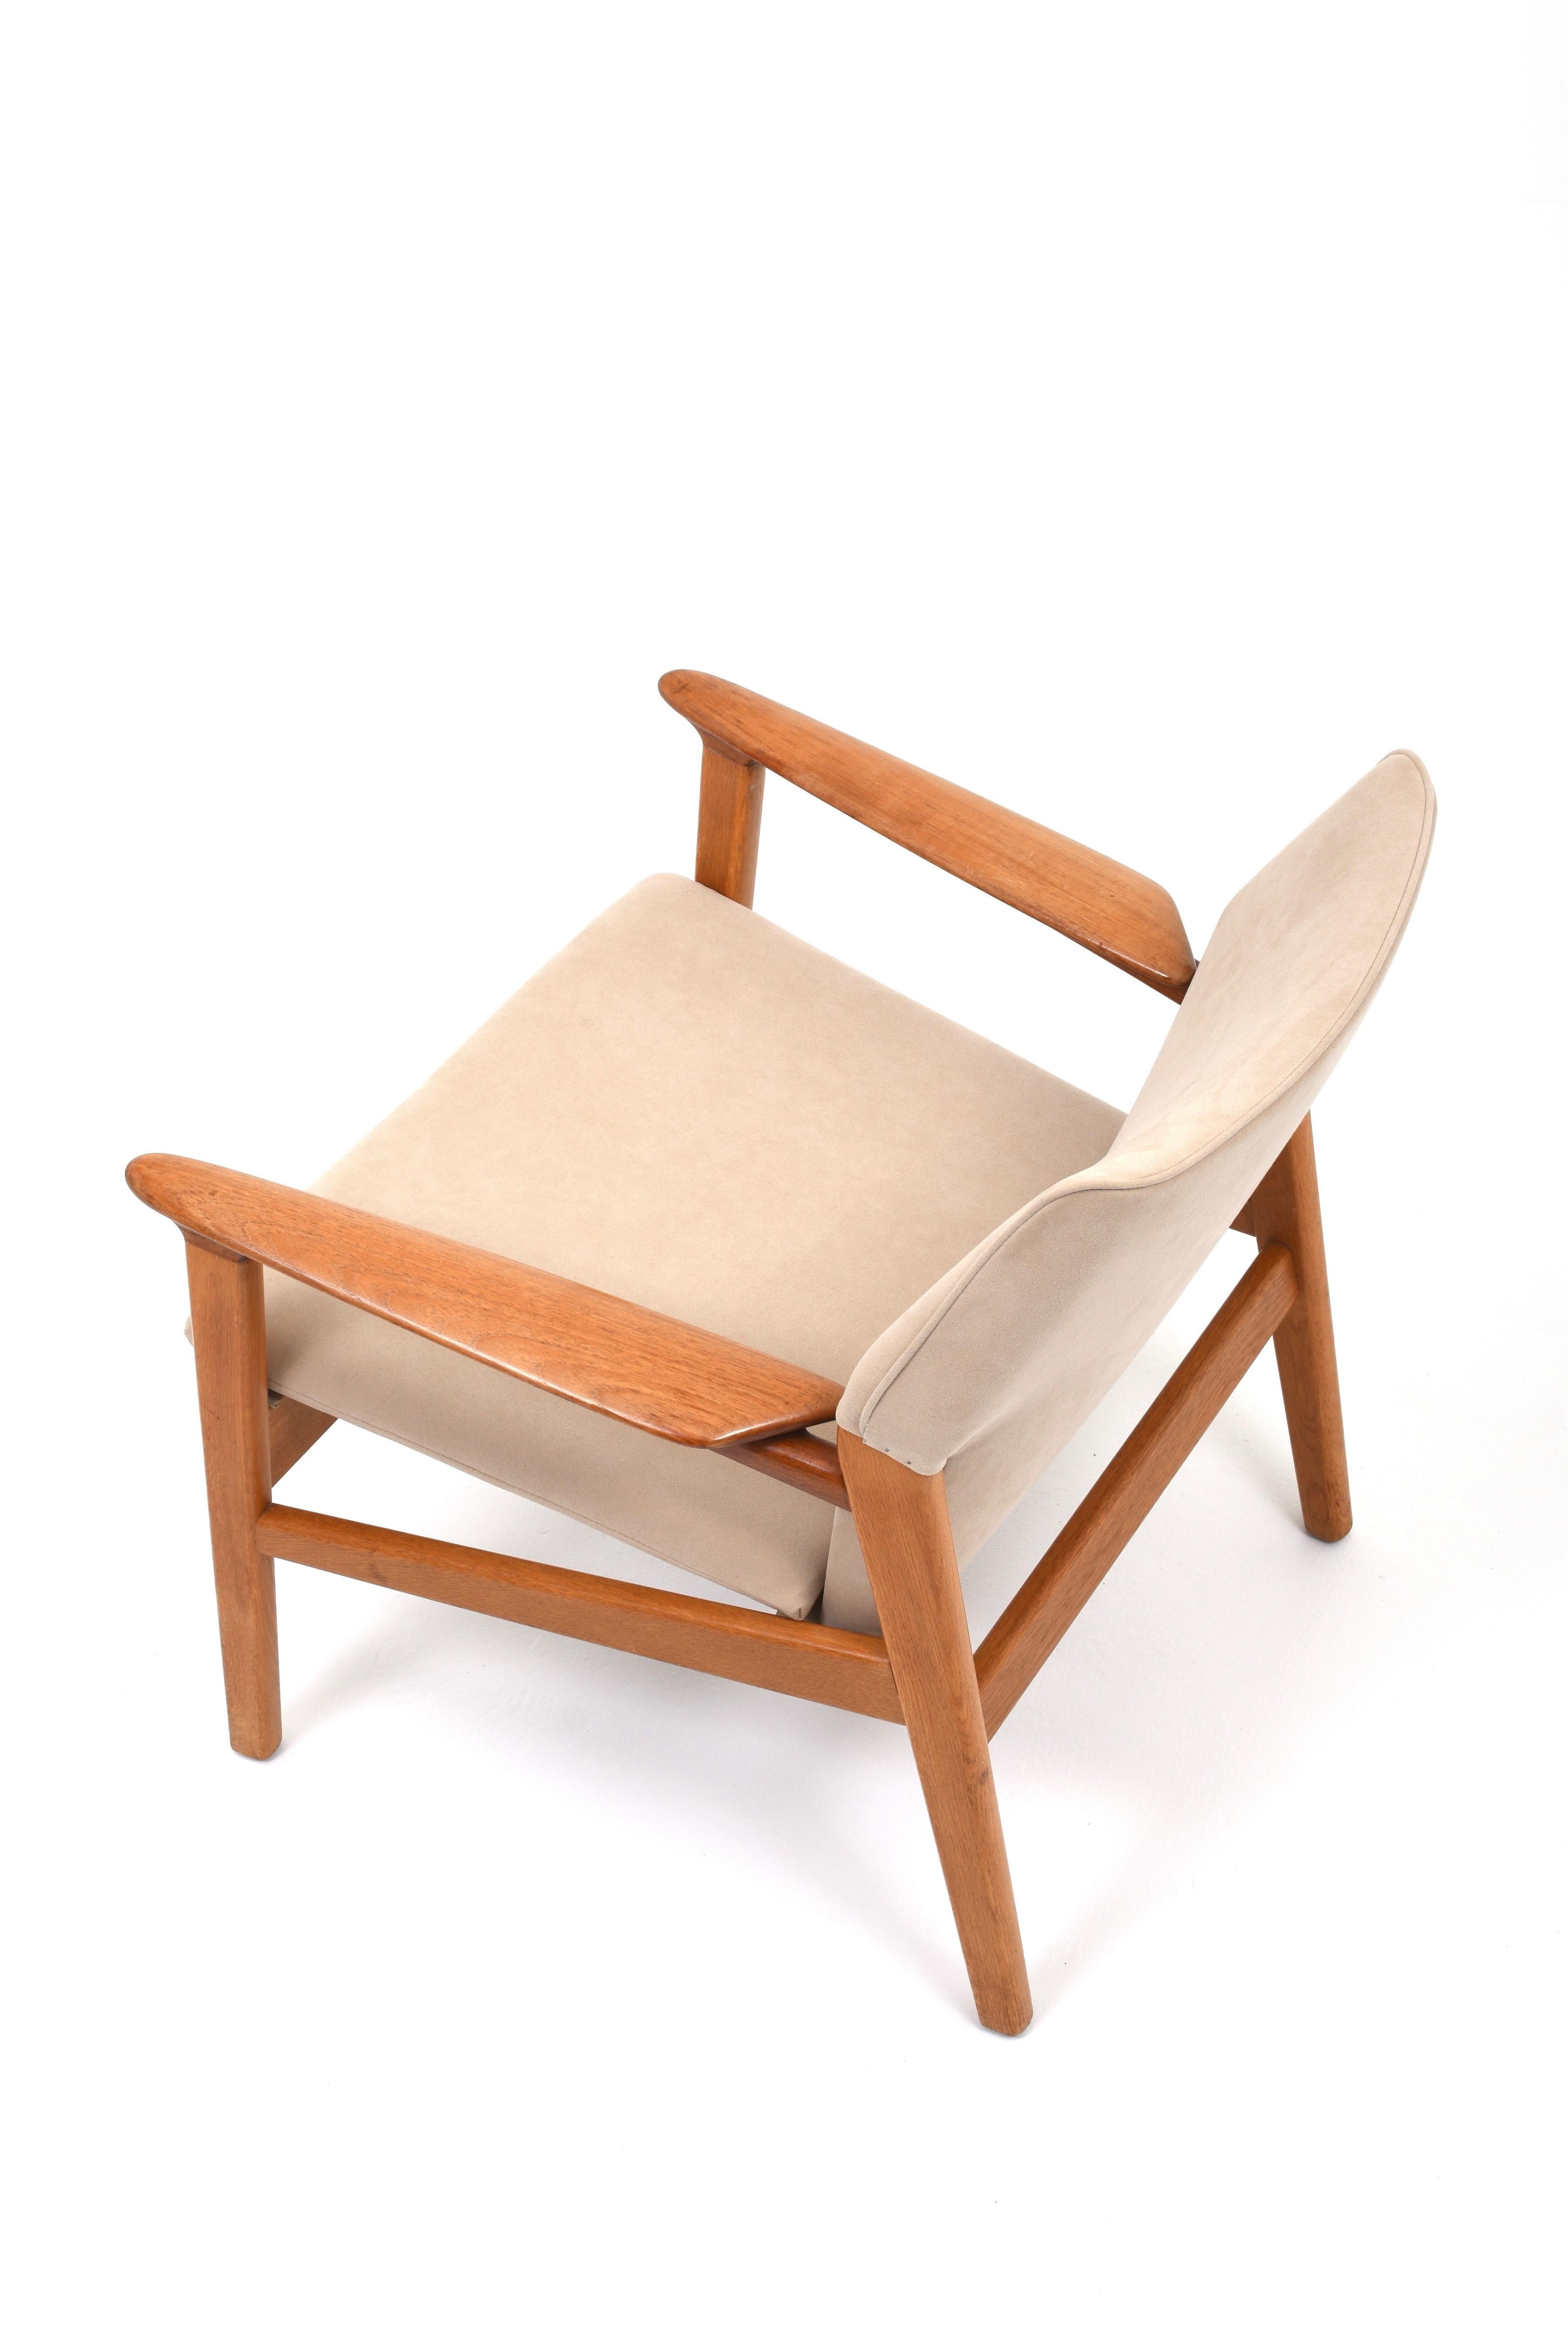 Fantastically comfortable and well-designed armchair by Hans Olsen for Gärsnäs, 1960s.

The armchair has been reupholstered and we have reupholstered it with a beige suede-like fabric. The frame is made of oak and teak.
